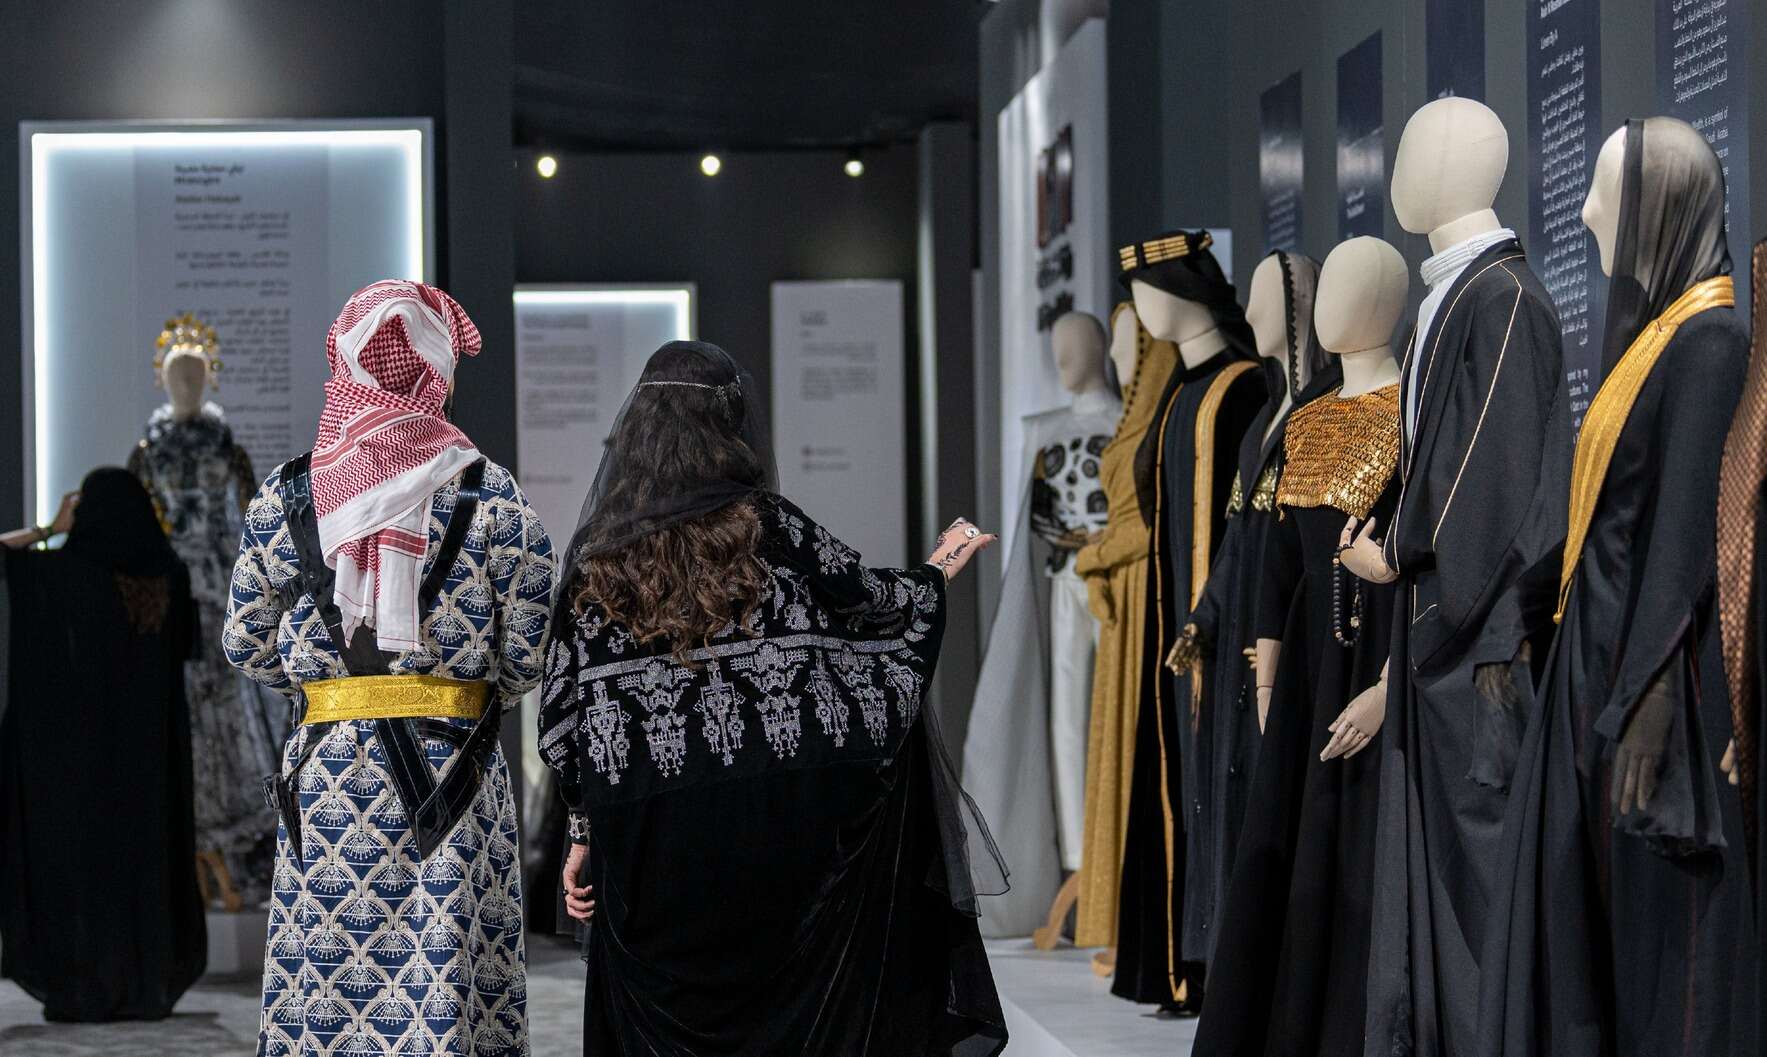 Fashion Brands: The Top 7 Saudi Distinctive, Modern Encounters Fusing Luxury and Genuineness. Saudi designers thrive there.